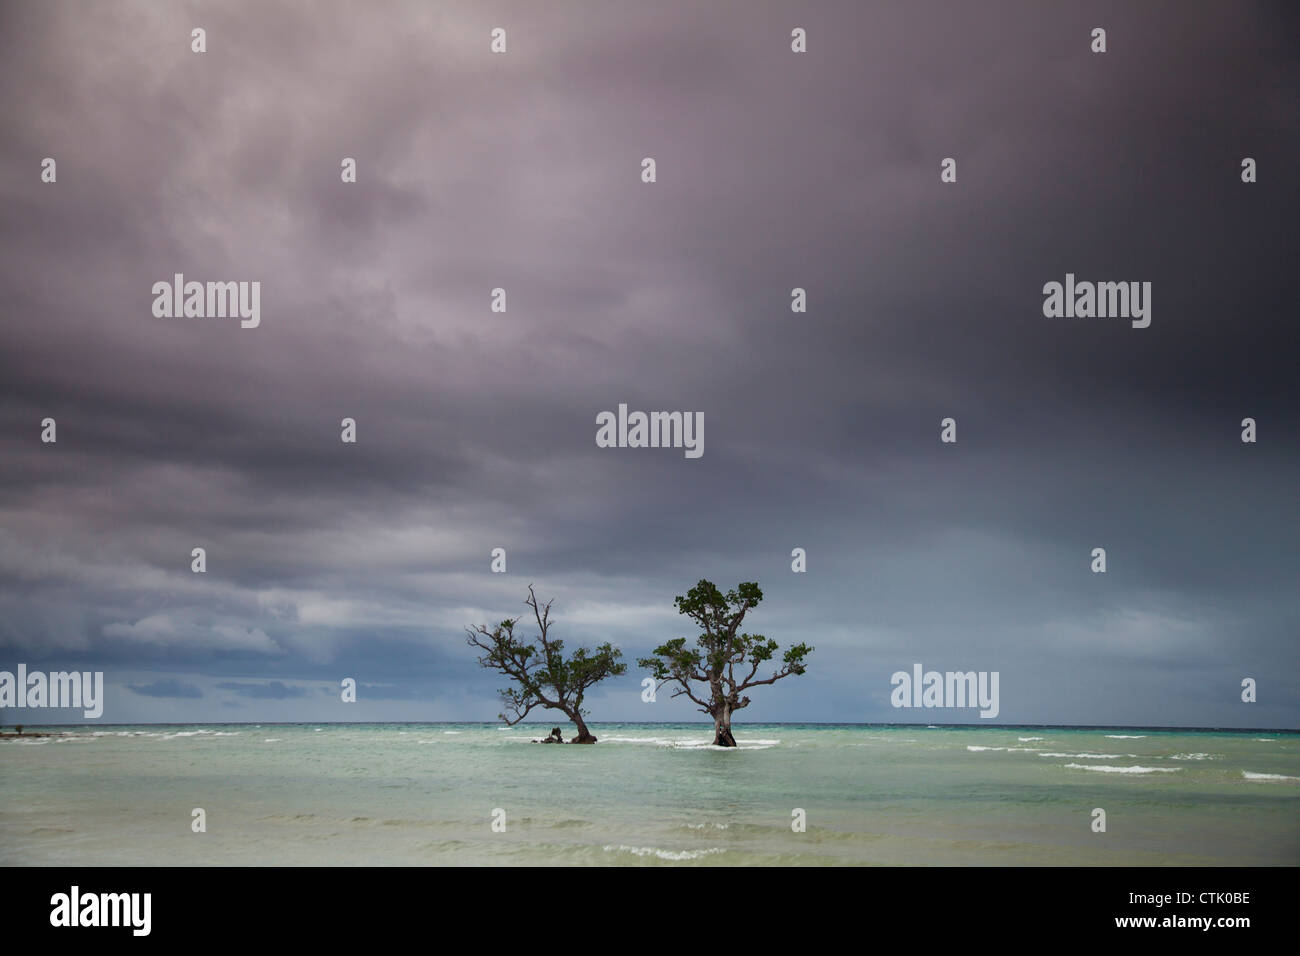 Two Mangrove Trees In The Ocean Off The Coast Of The Island Of Siquijor; Philippines Stock Photo